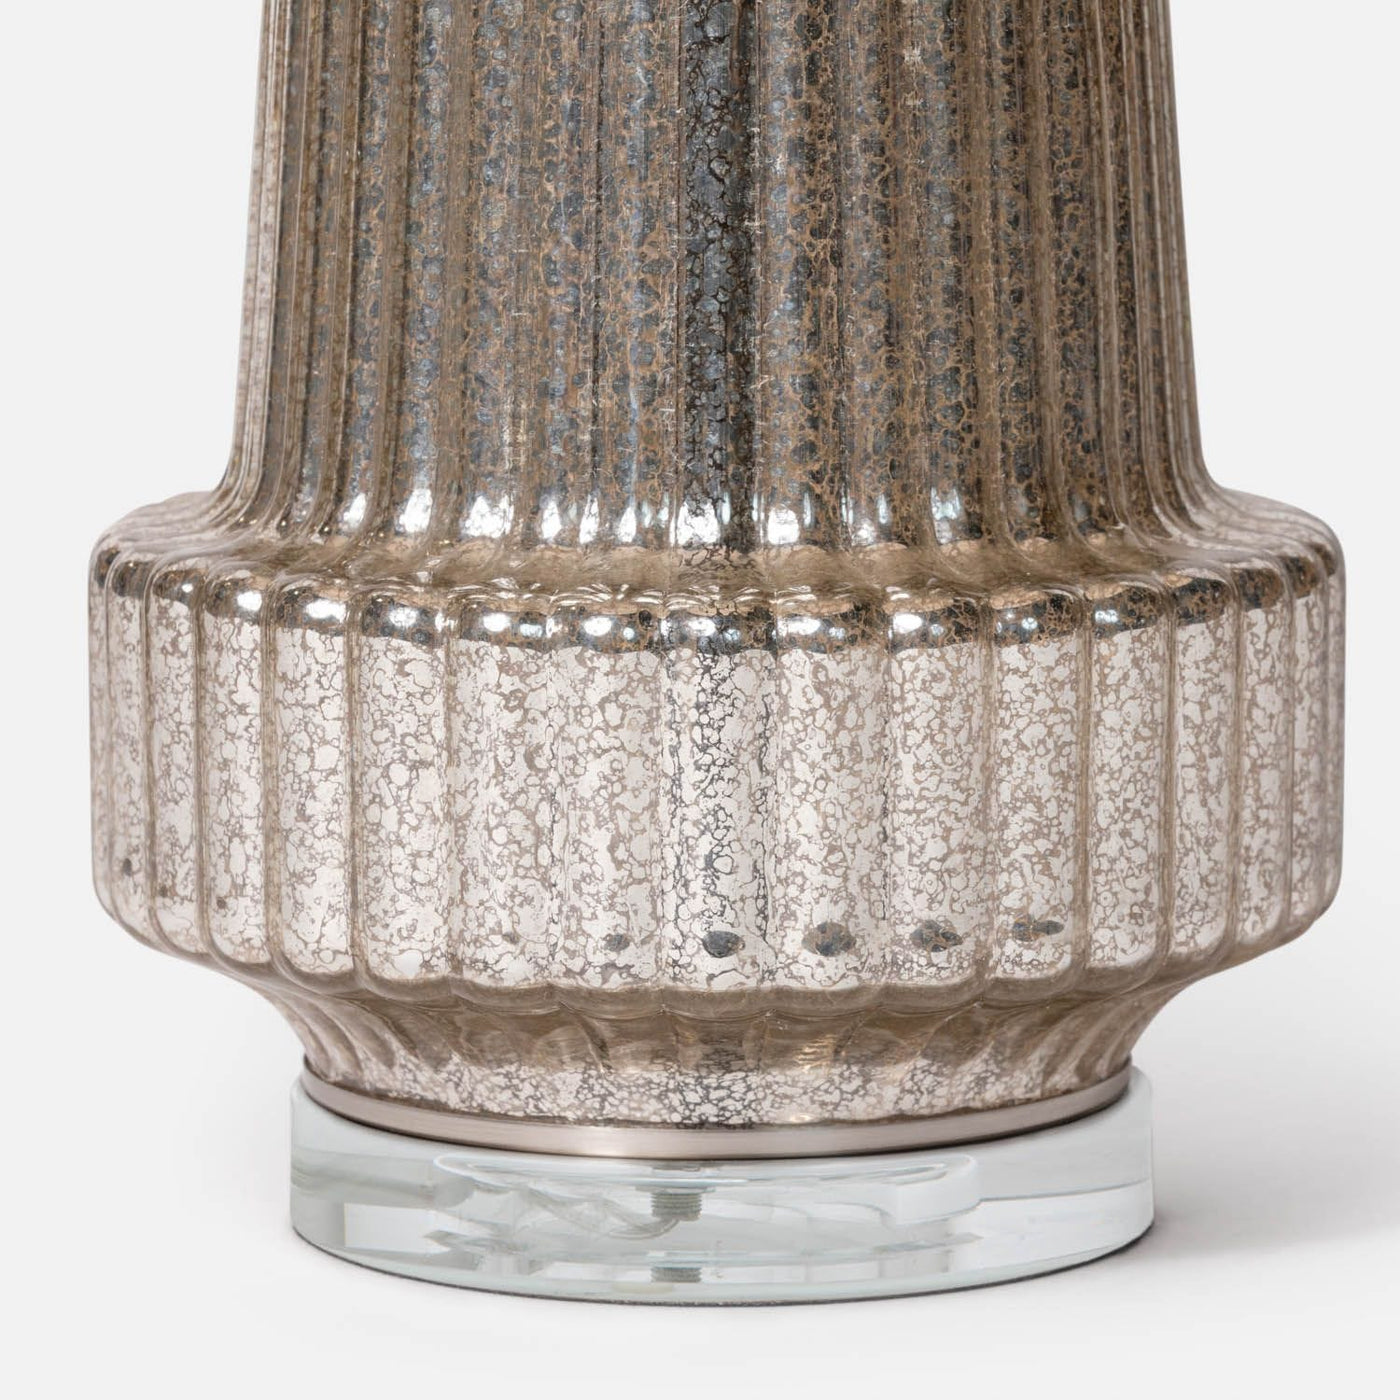 TABLE LAMP GLASS TAPERED DRUM